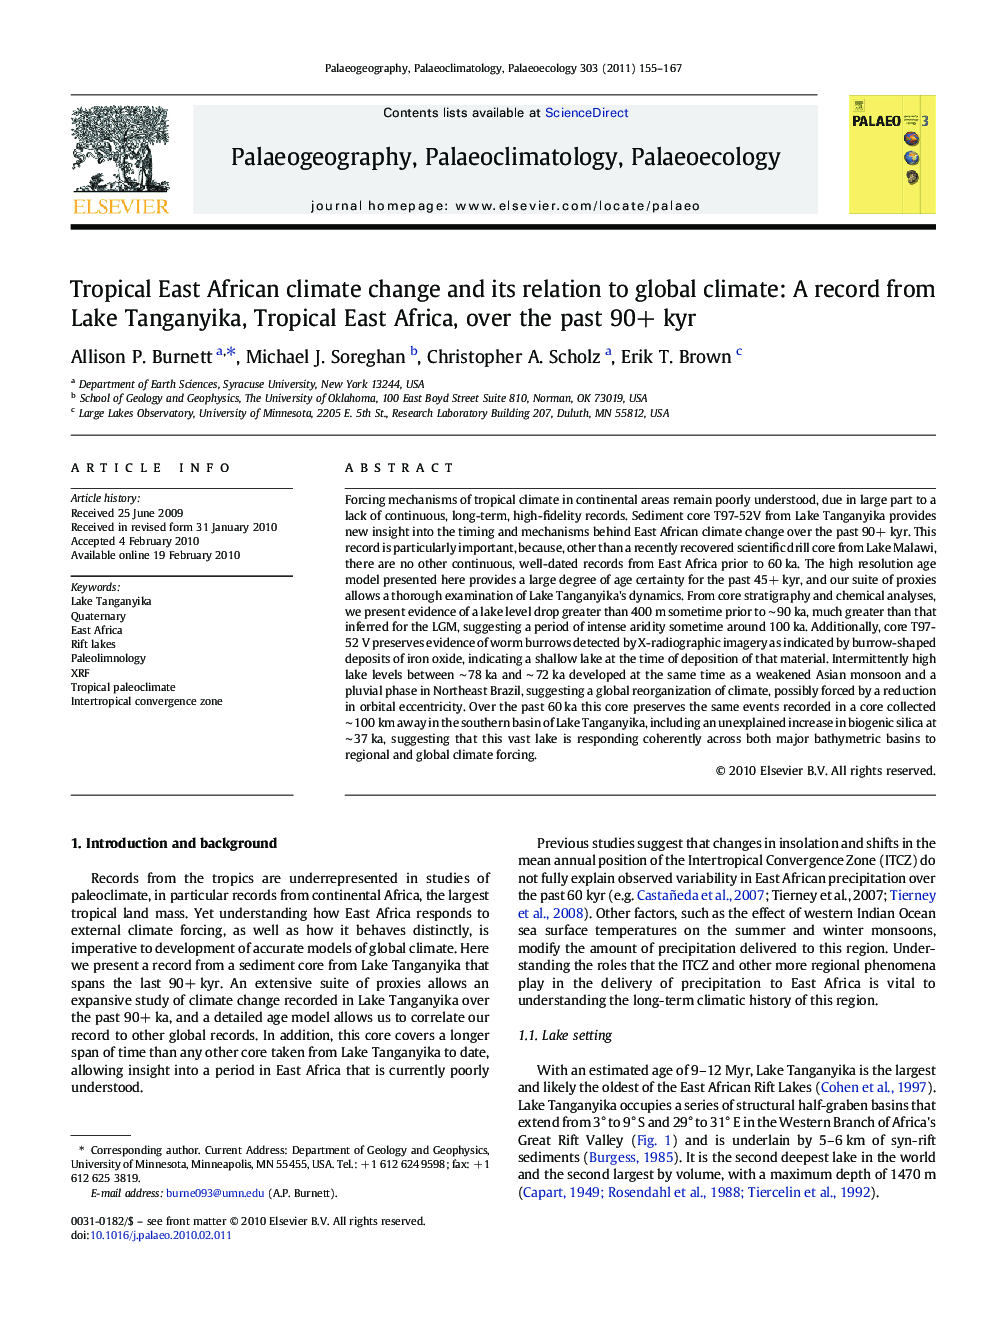 Tropical East African climate change and its relation to global climate: A record from Lake Tanganyika, Tropical East Africa, over the past 90+ kyr